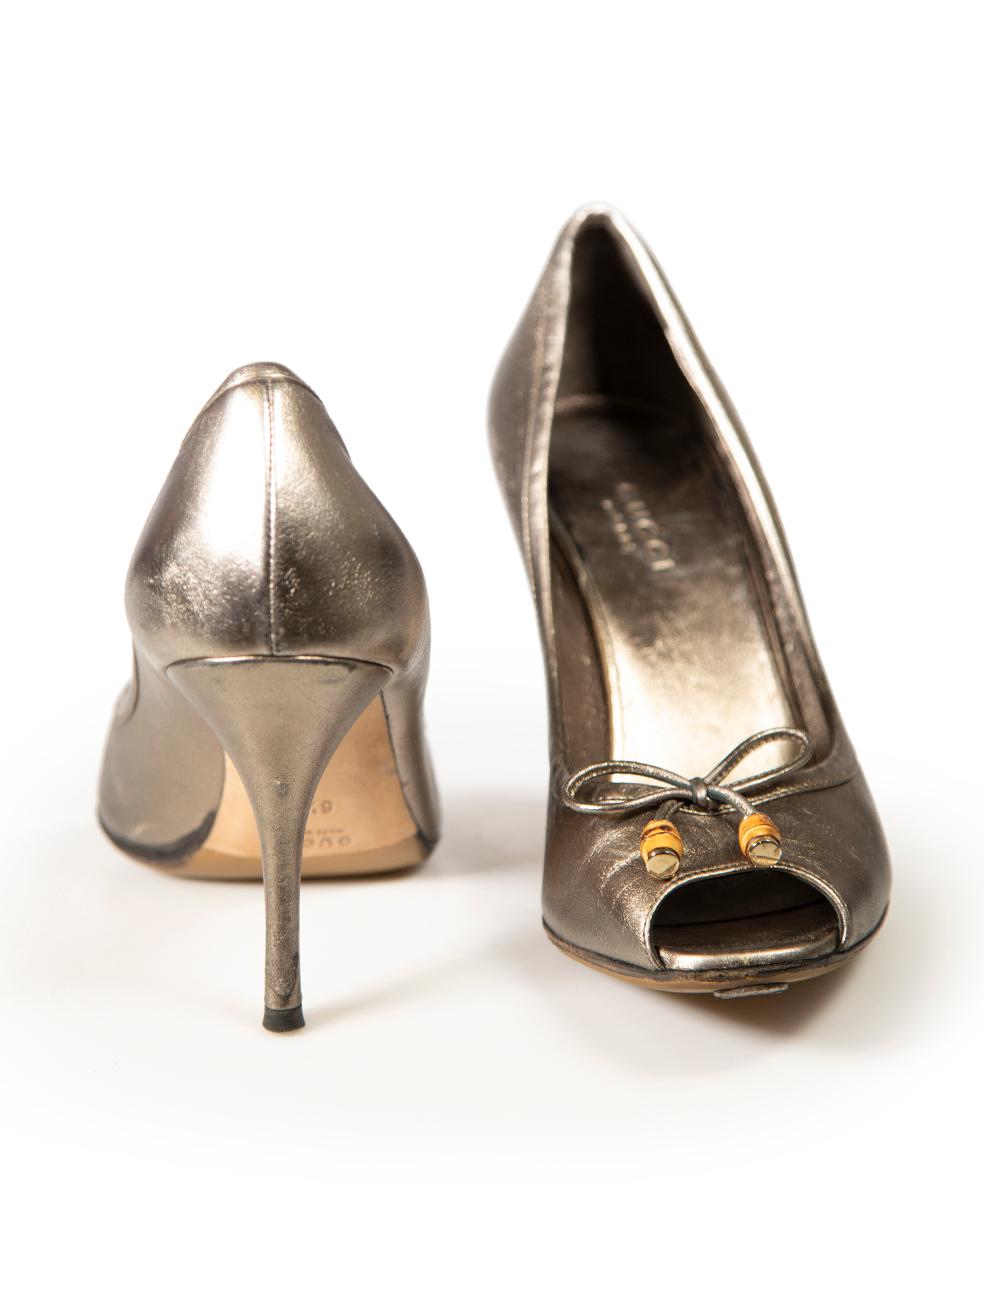 Gucci Metallic Peep-Toe Heels Size US 6.5 In Good Condition For Sale In London, GB